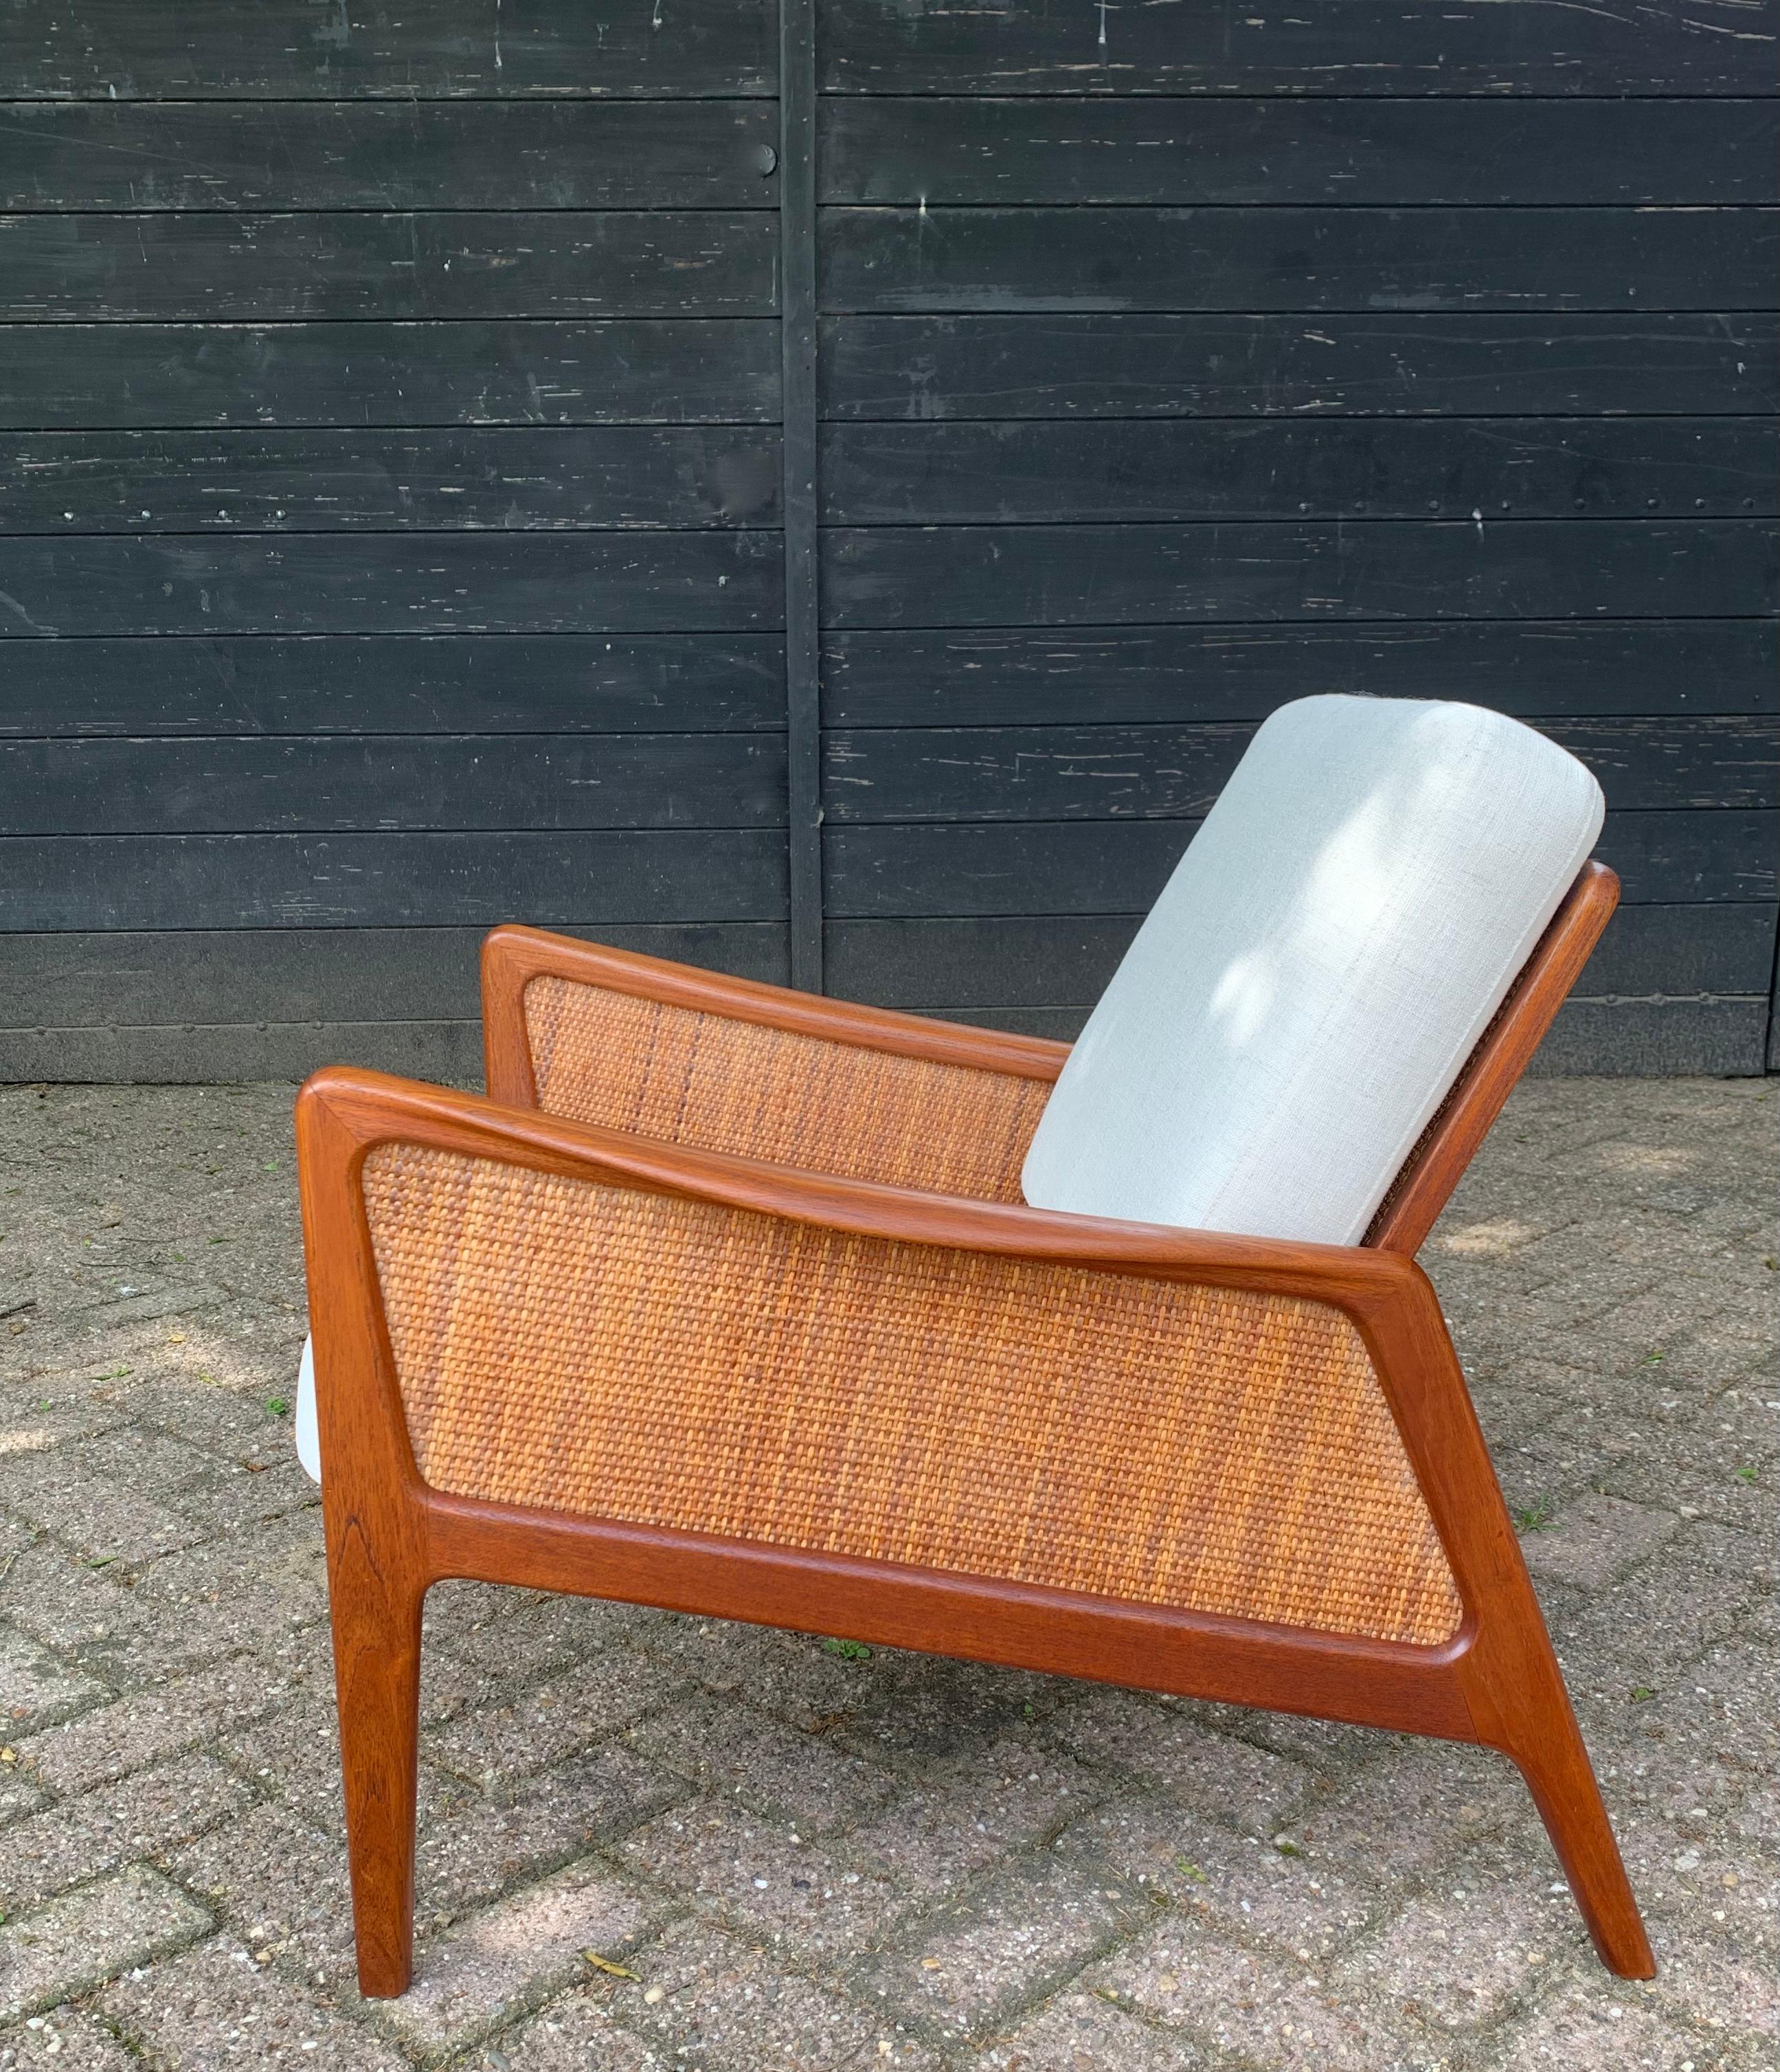 Teak & cane lounge chair designed by Danish designers Peter Hvidt & Orla Mølgaard-Nielsen. This renowned designer duo has stood side by side for over 30 years, designing many famous and intrinsic designs. Amongst this beautiful lounge chair model